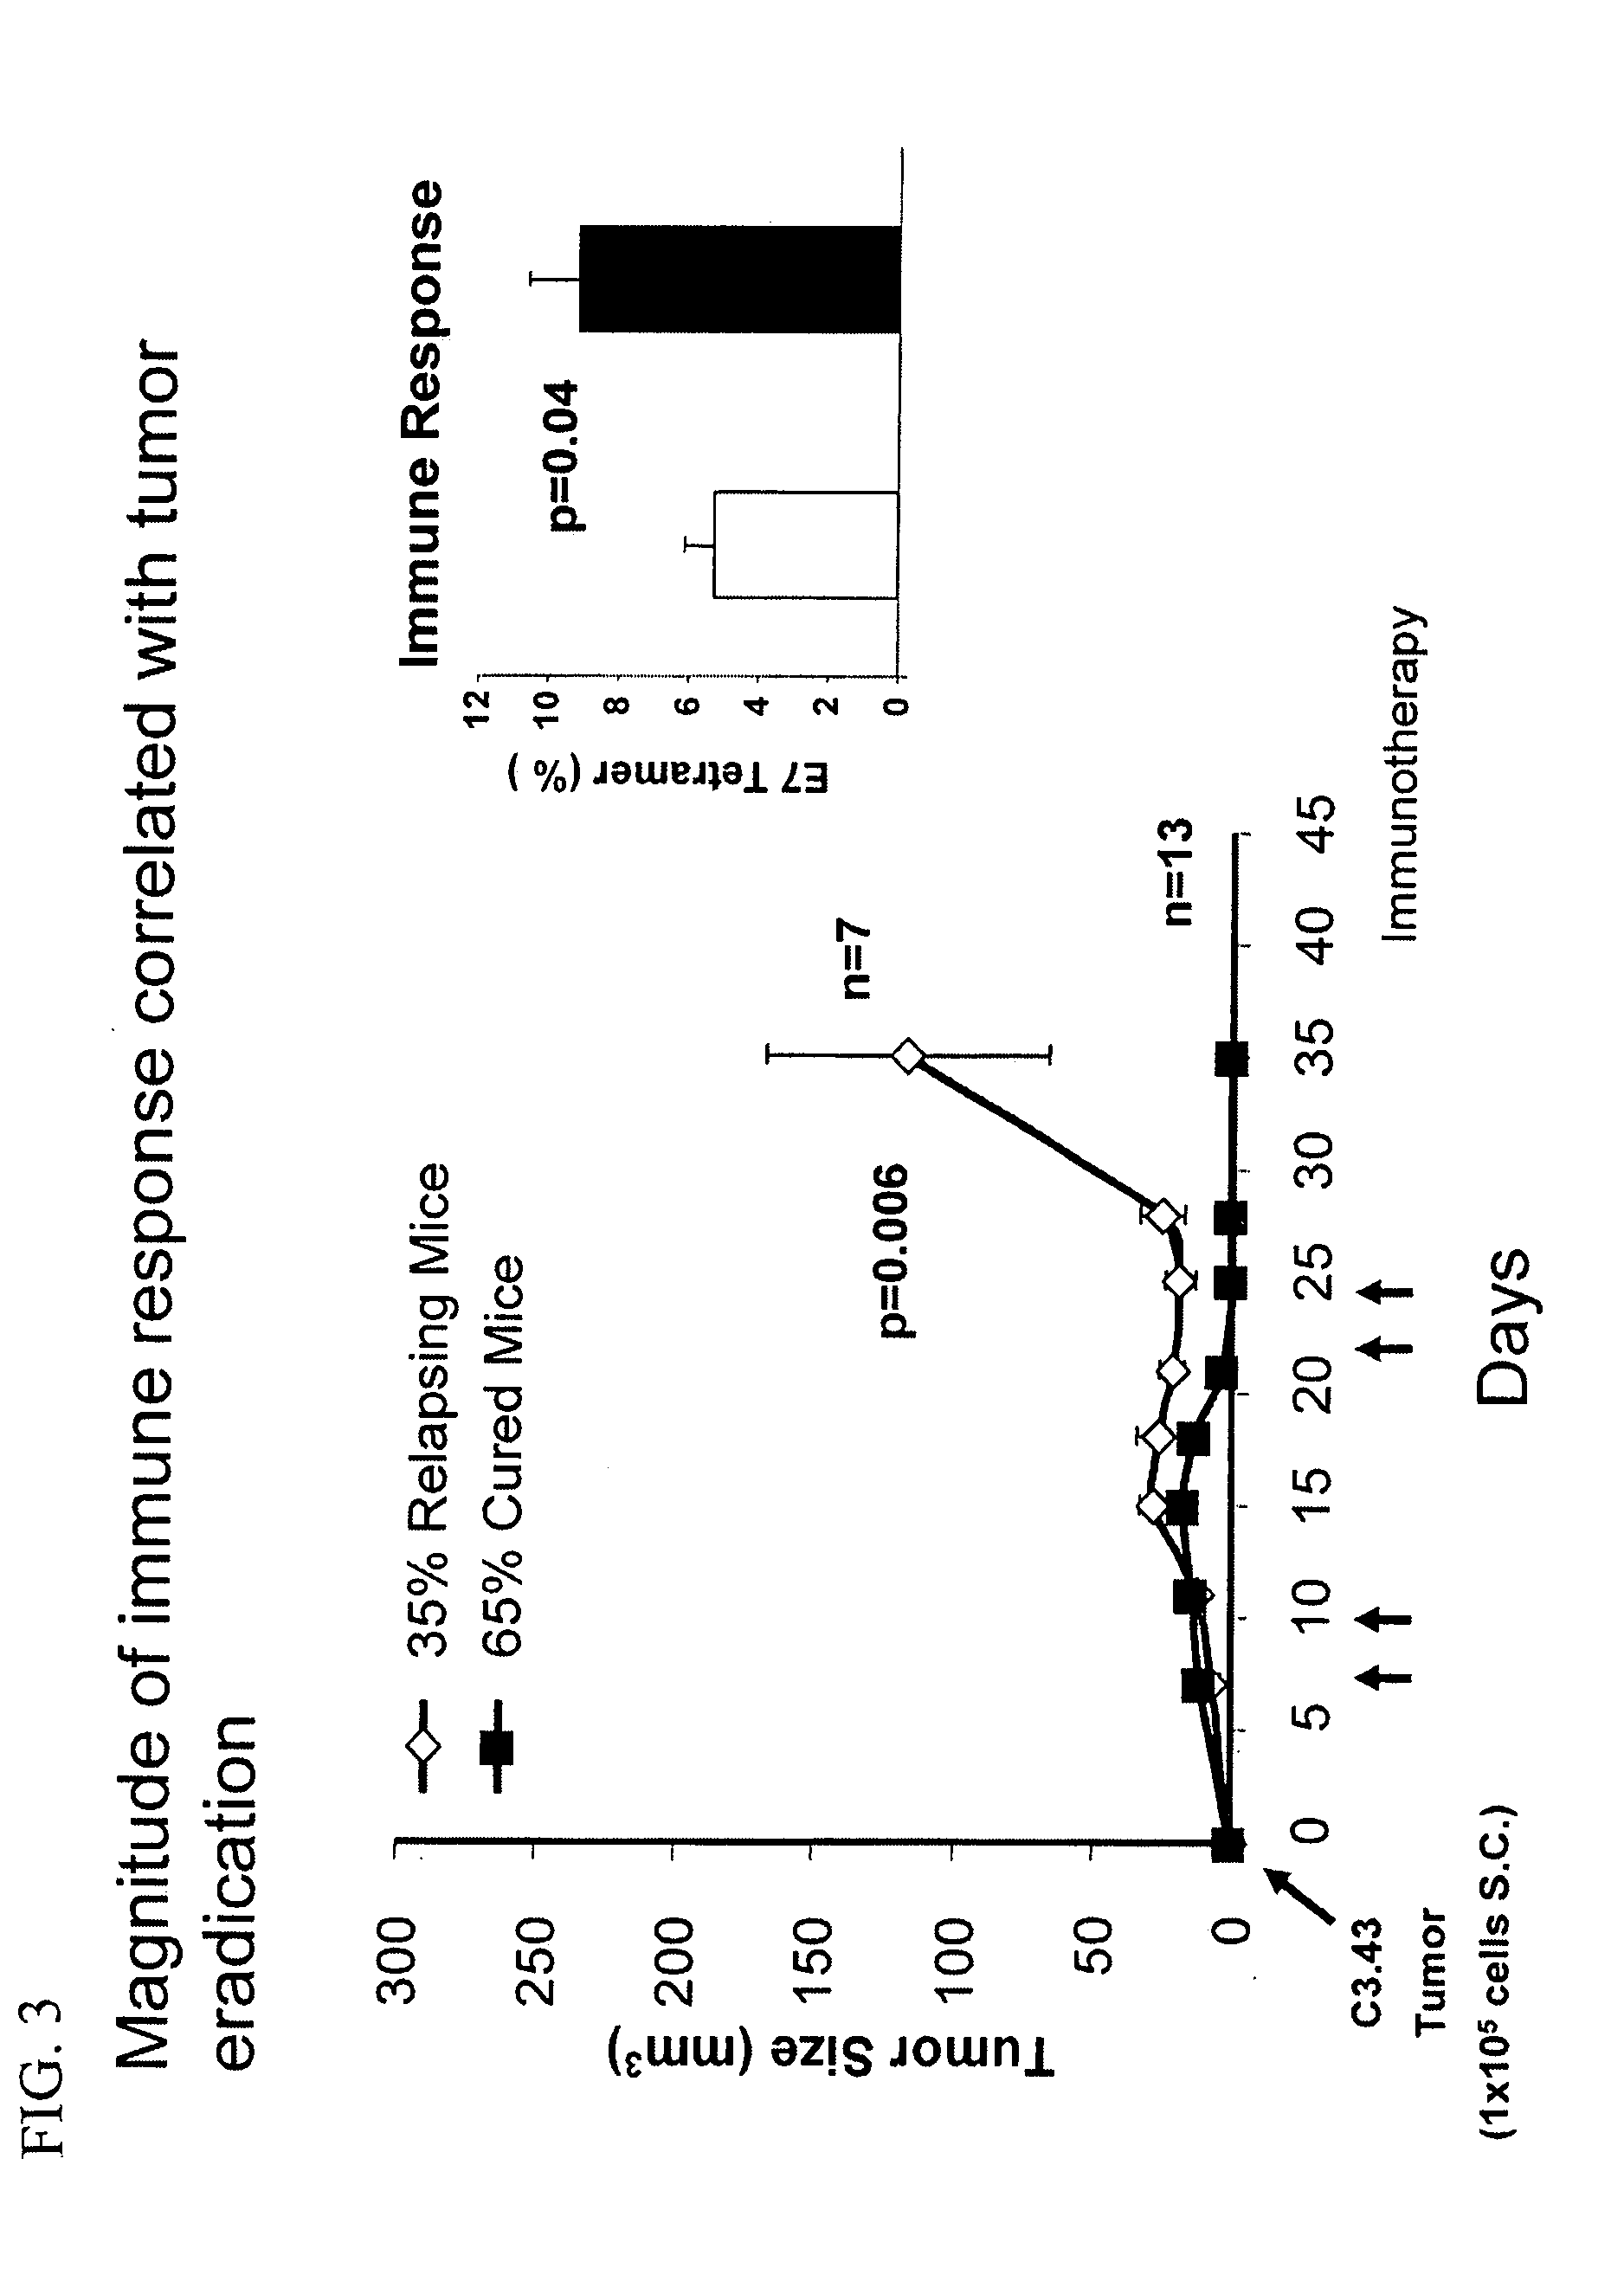 Methods to elicit, enhance and sustain immune responses against MHC class I-restricted epitopes, for prophylactic and therapeutic purposes